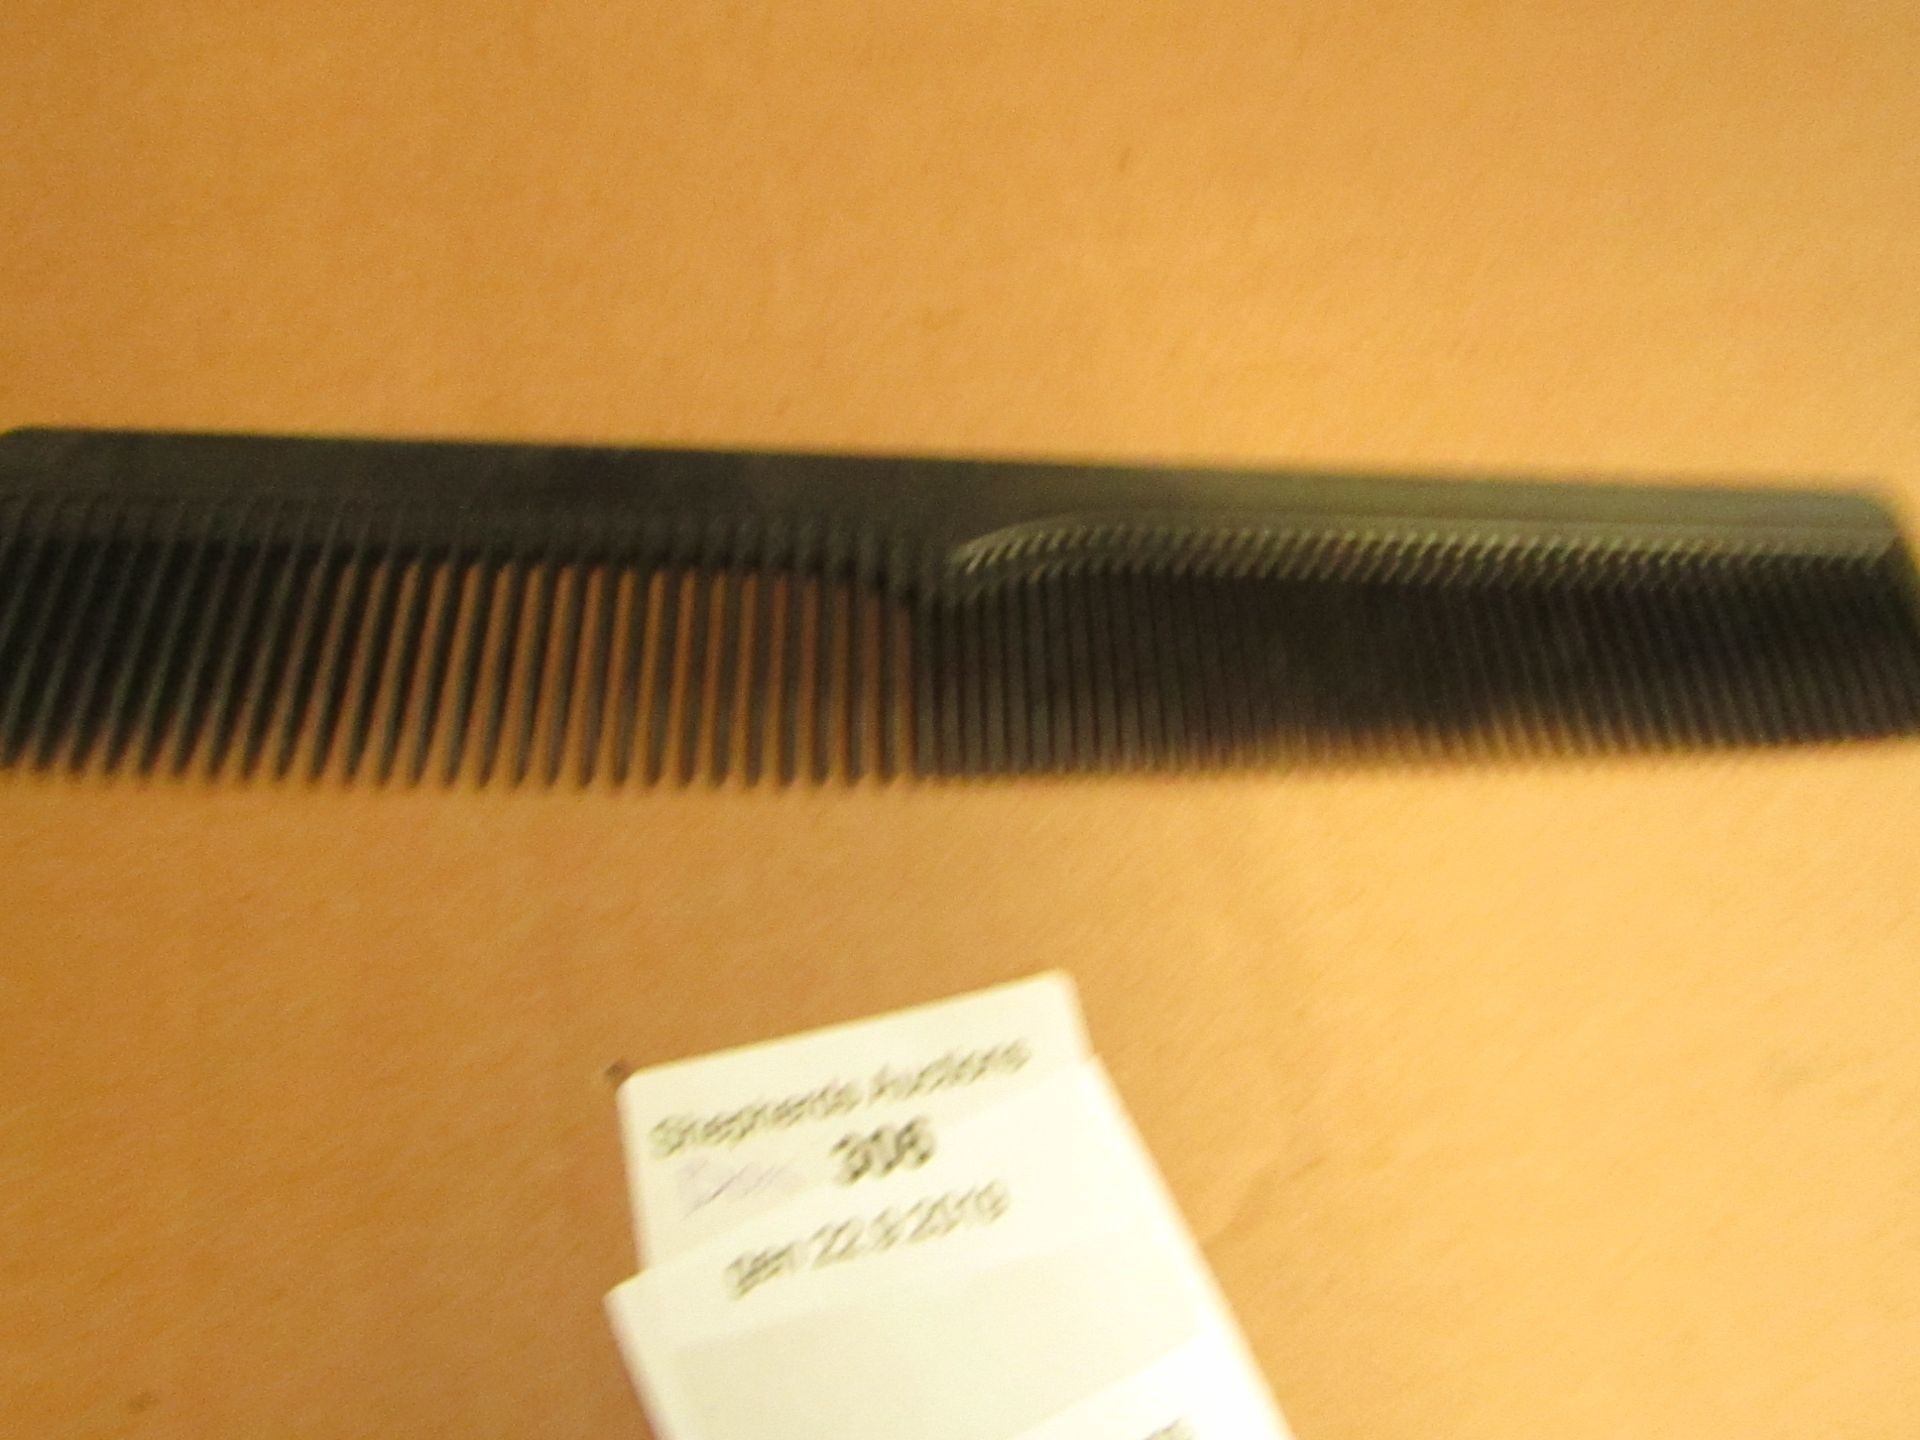 2 Packs of 11 Large Hair Combs (22 in total) New & Packaged